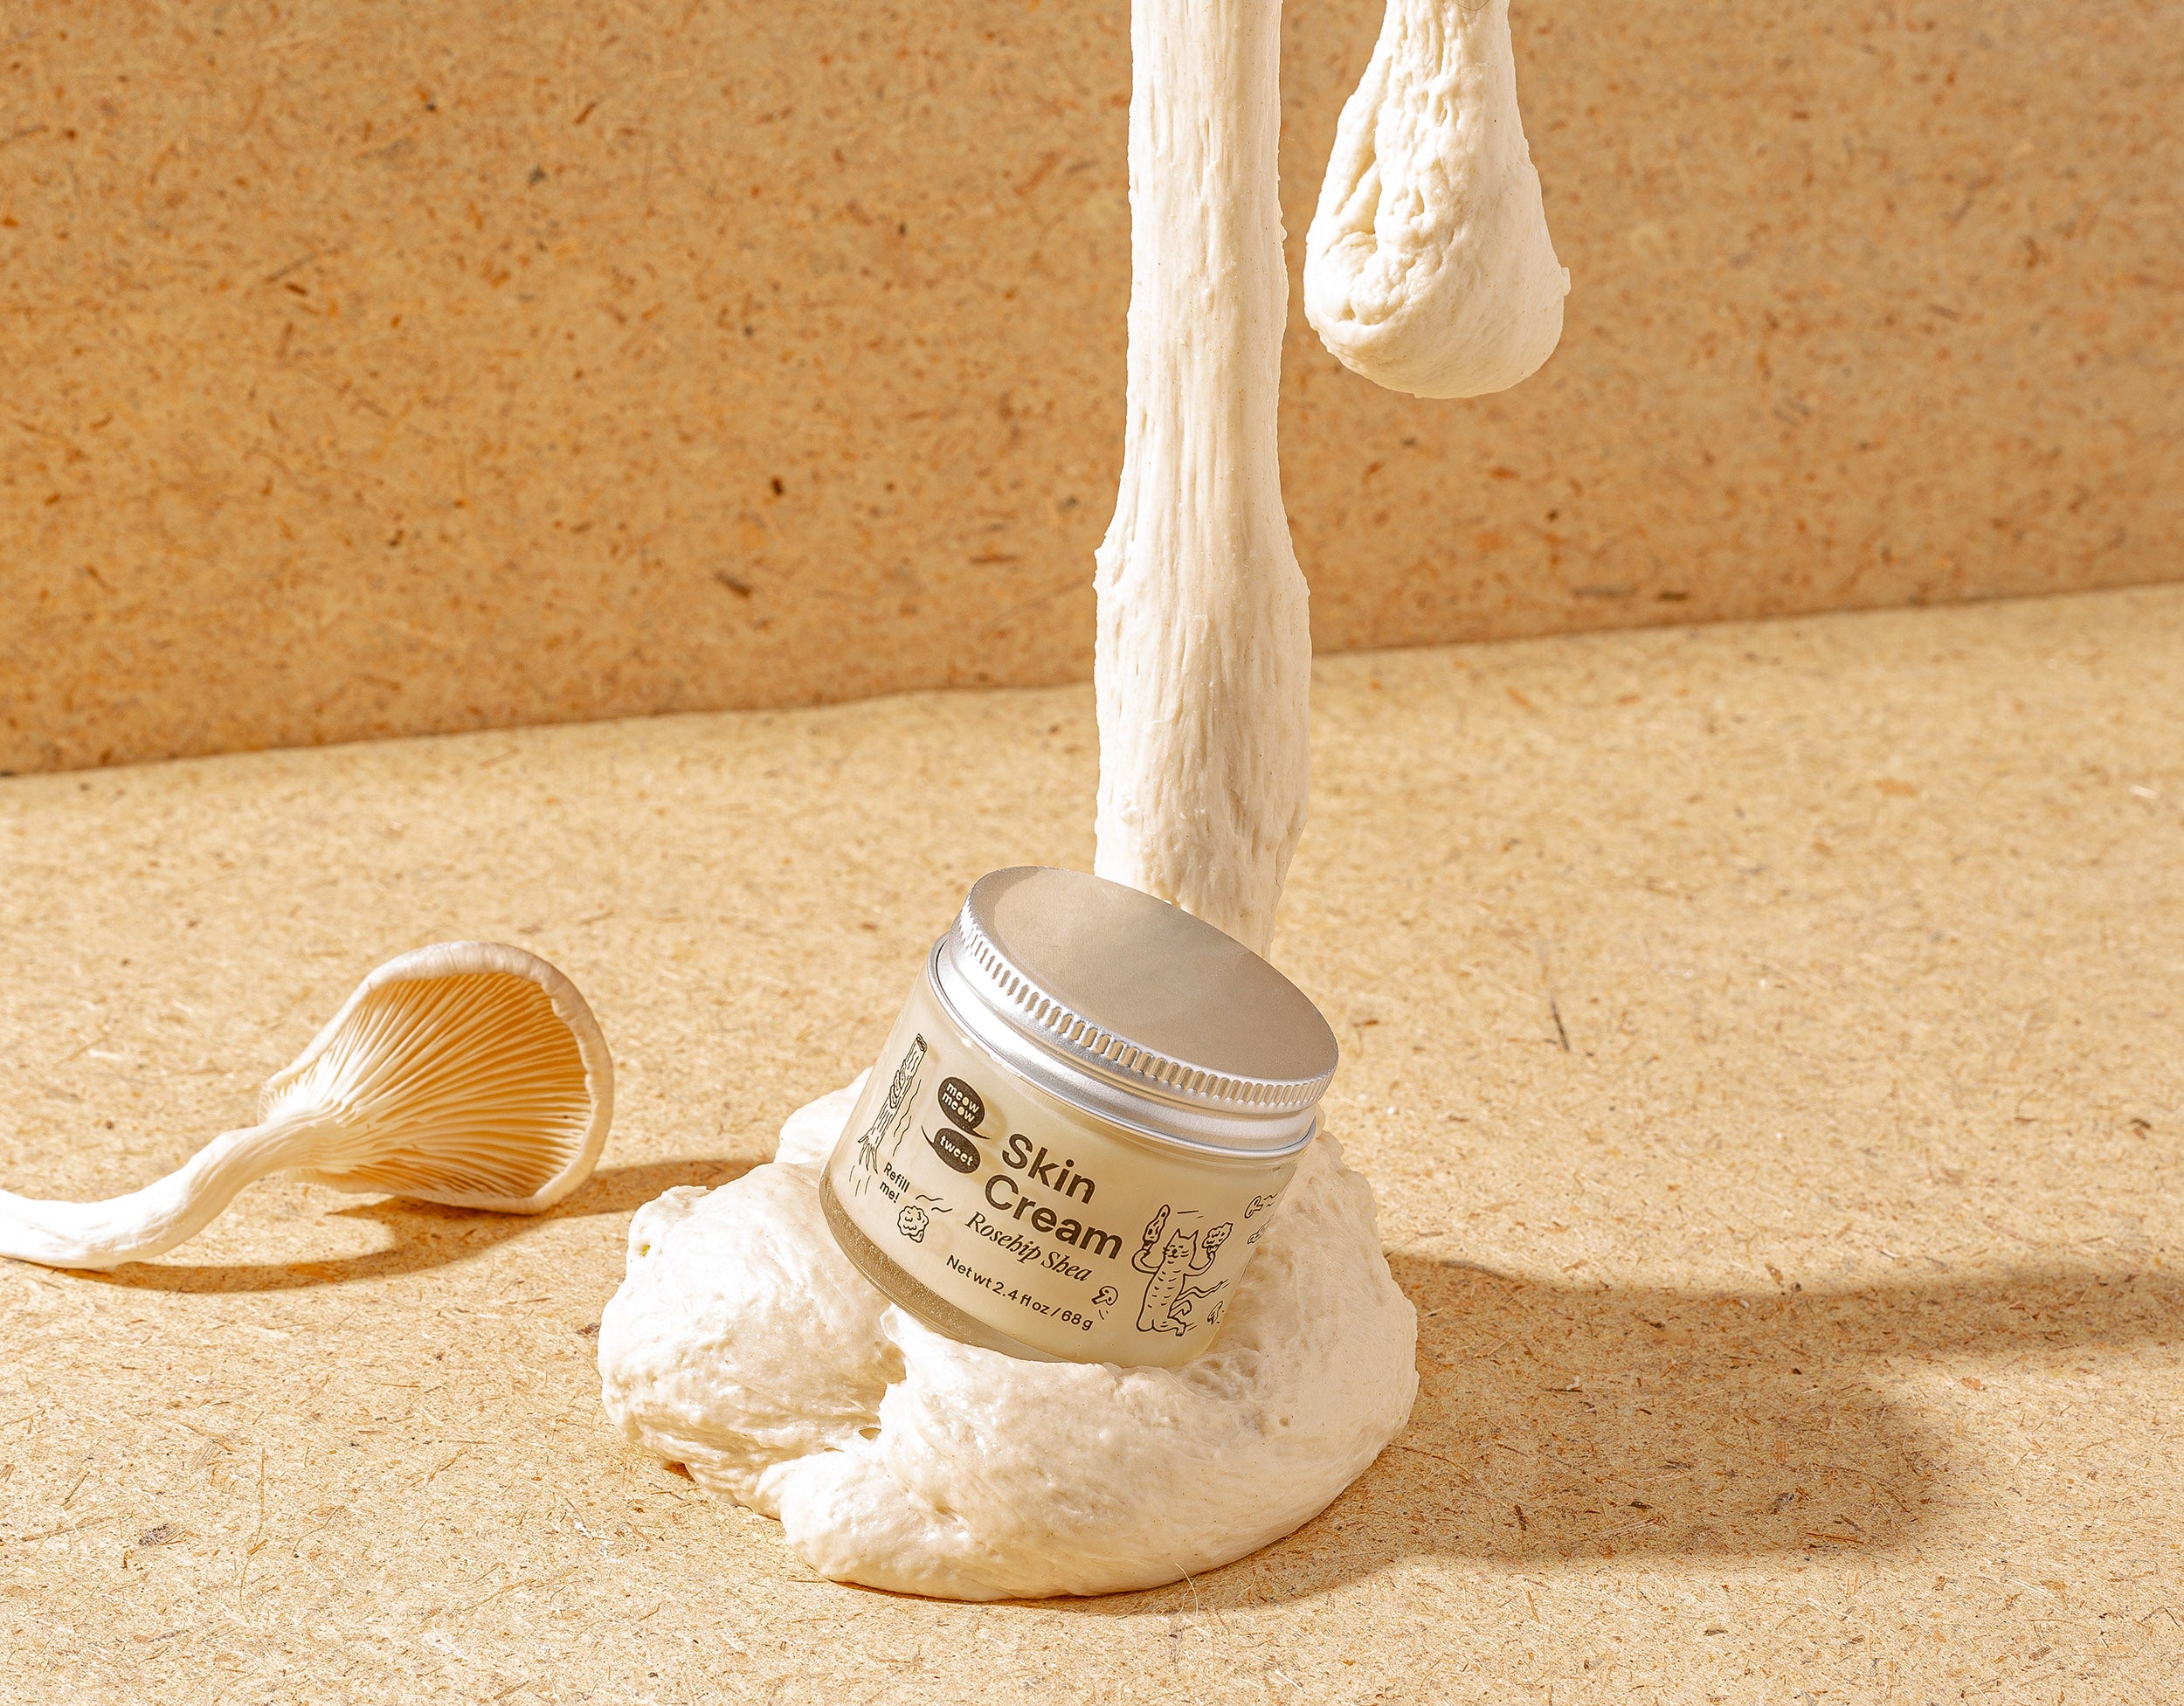 A skin cream sits on a pile of uncooked dough on a tan background